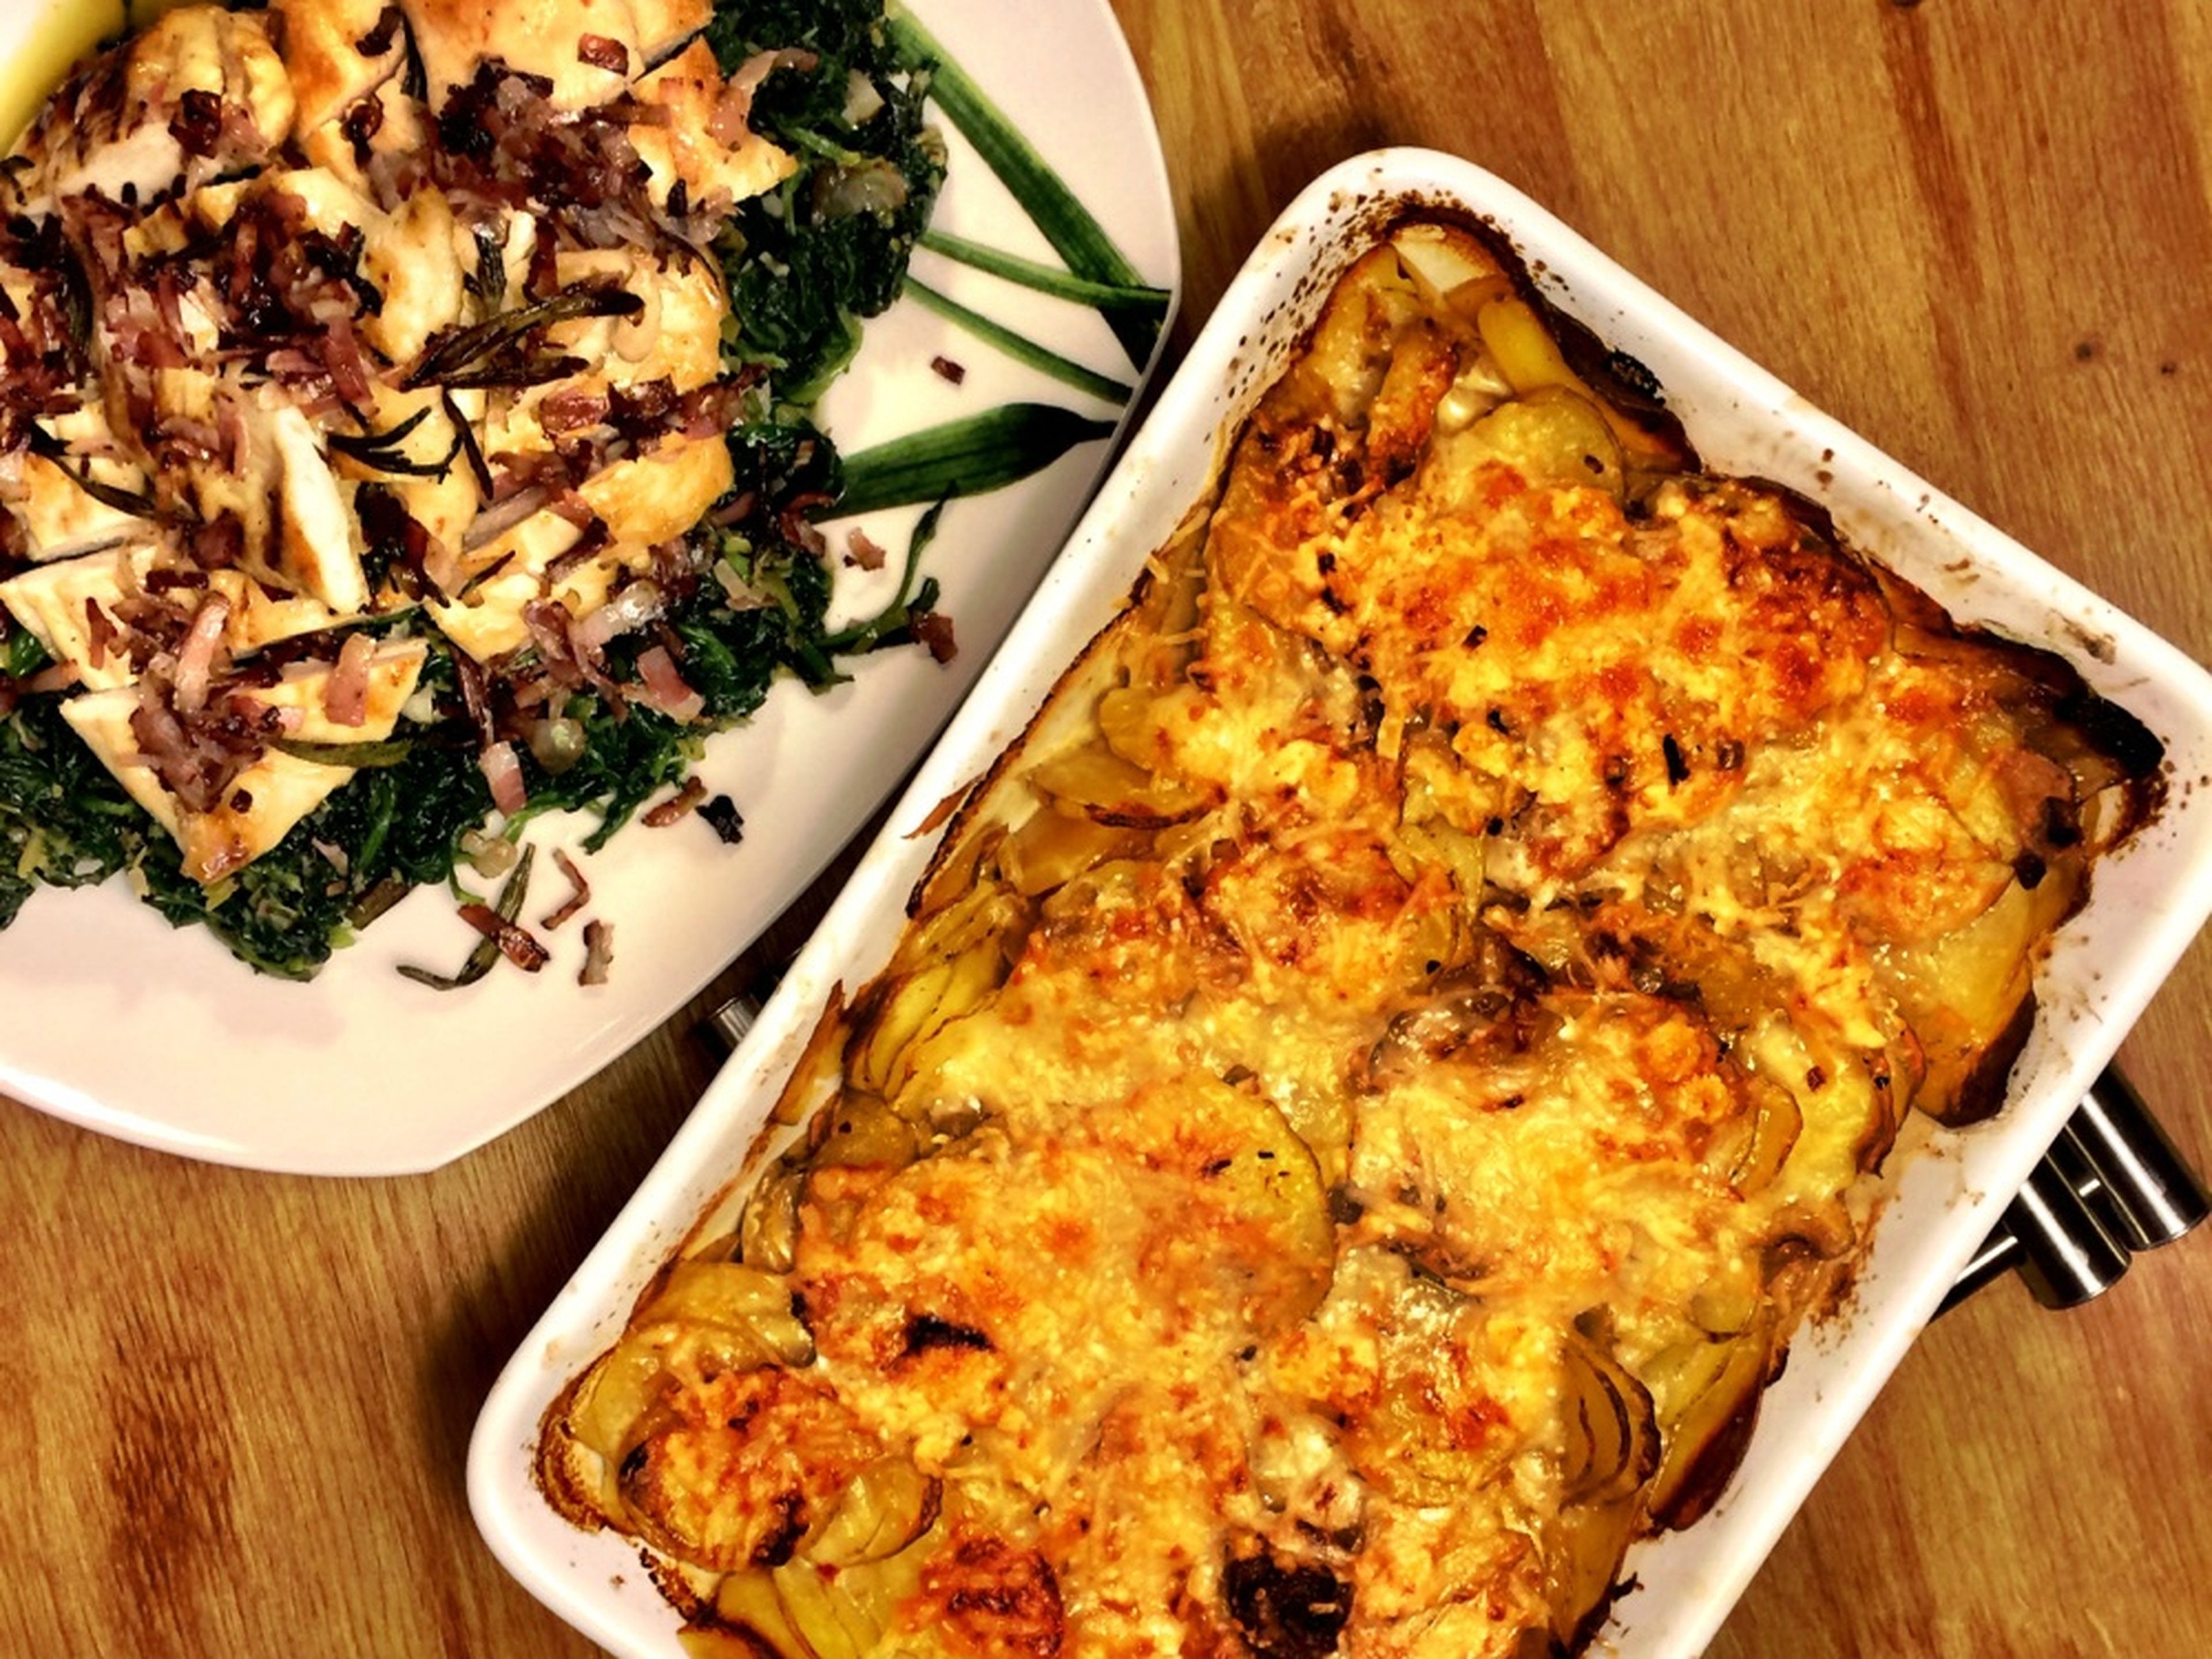 Chicken breast with spinach and quick potato gratin